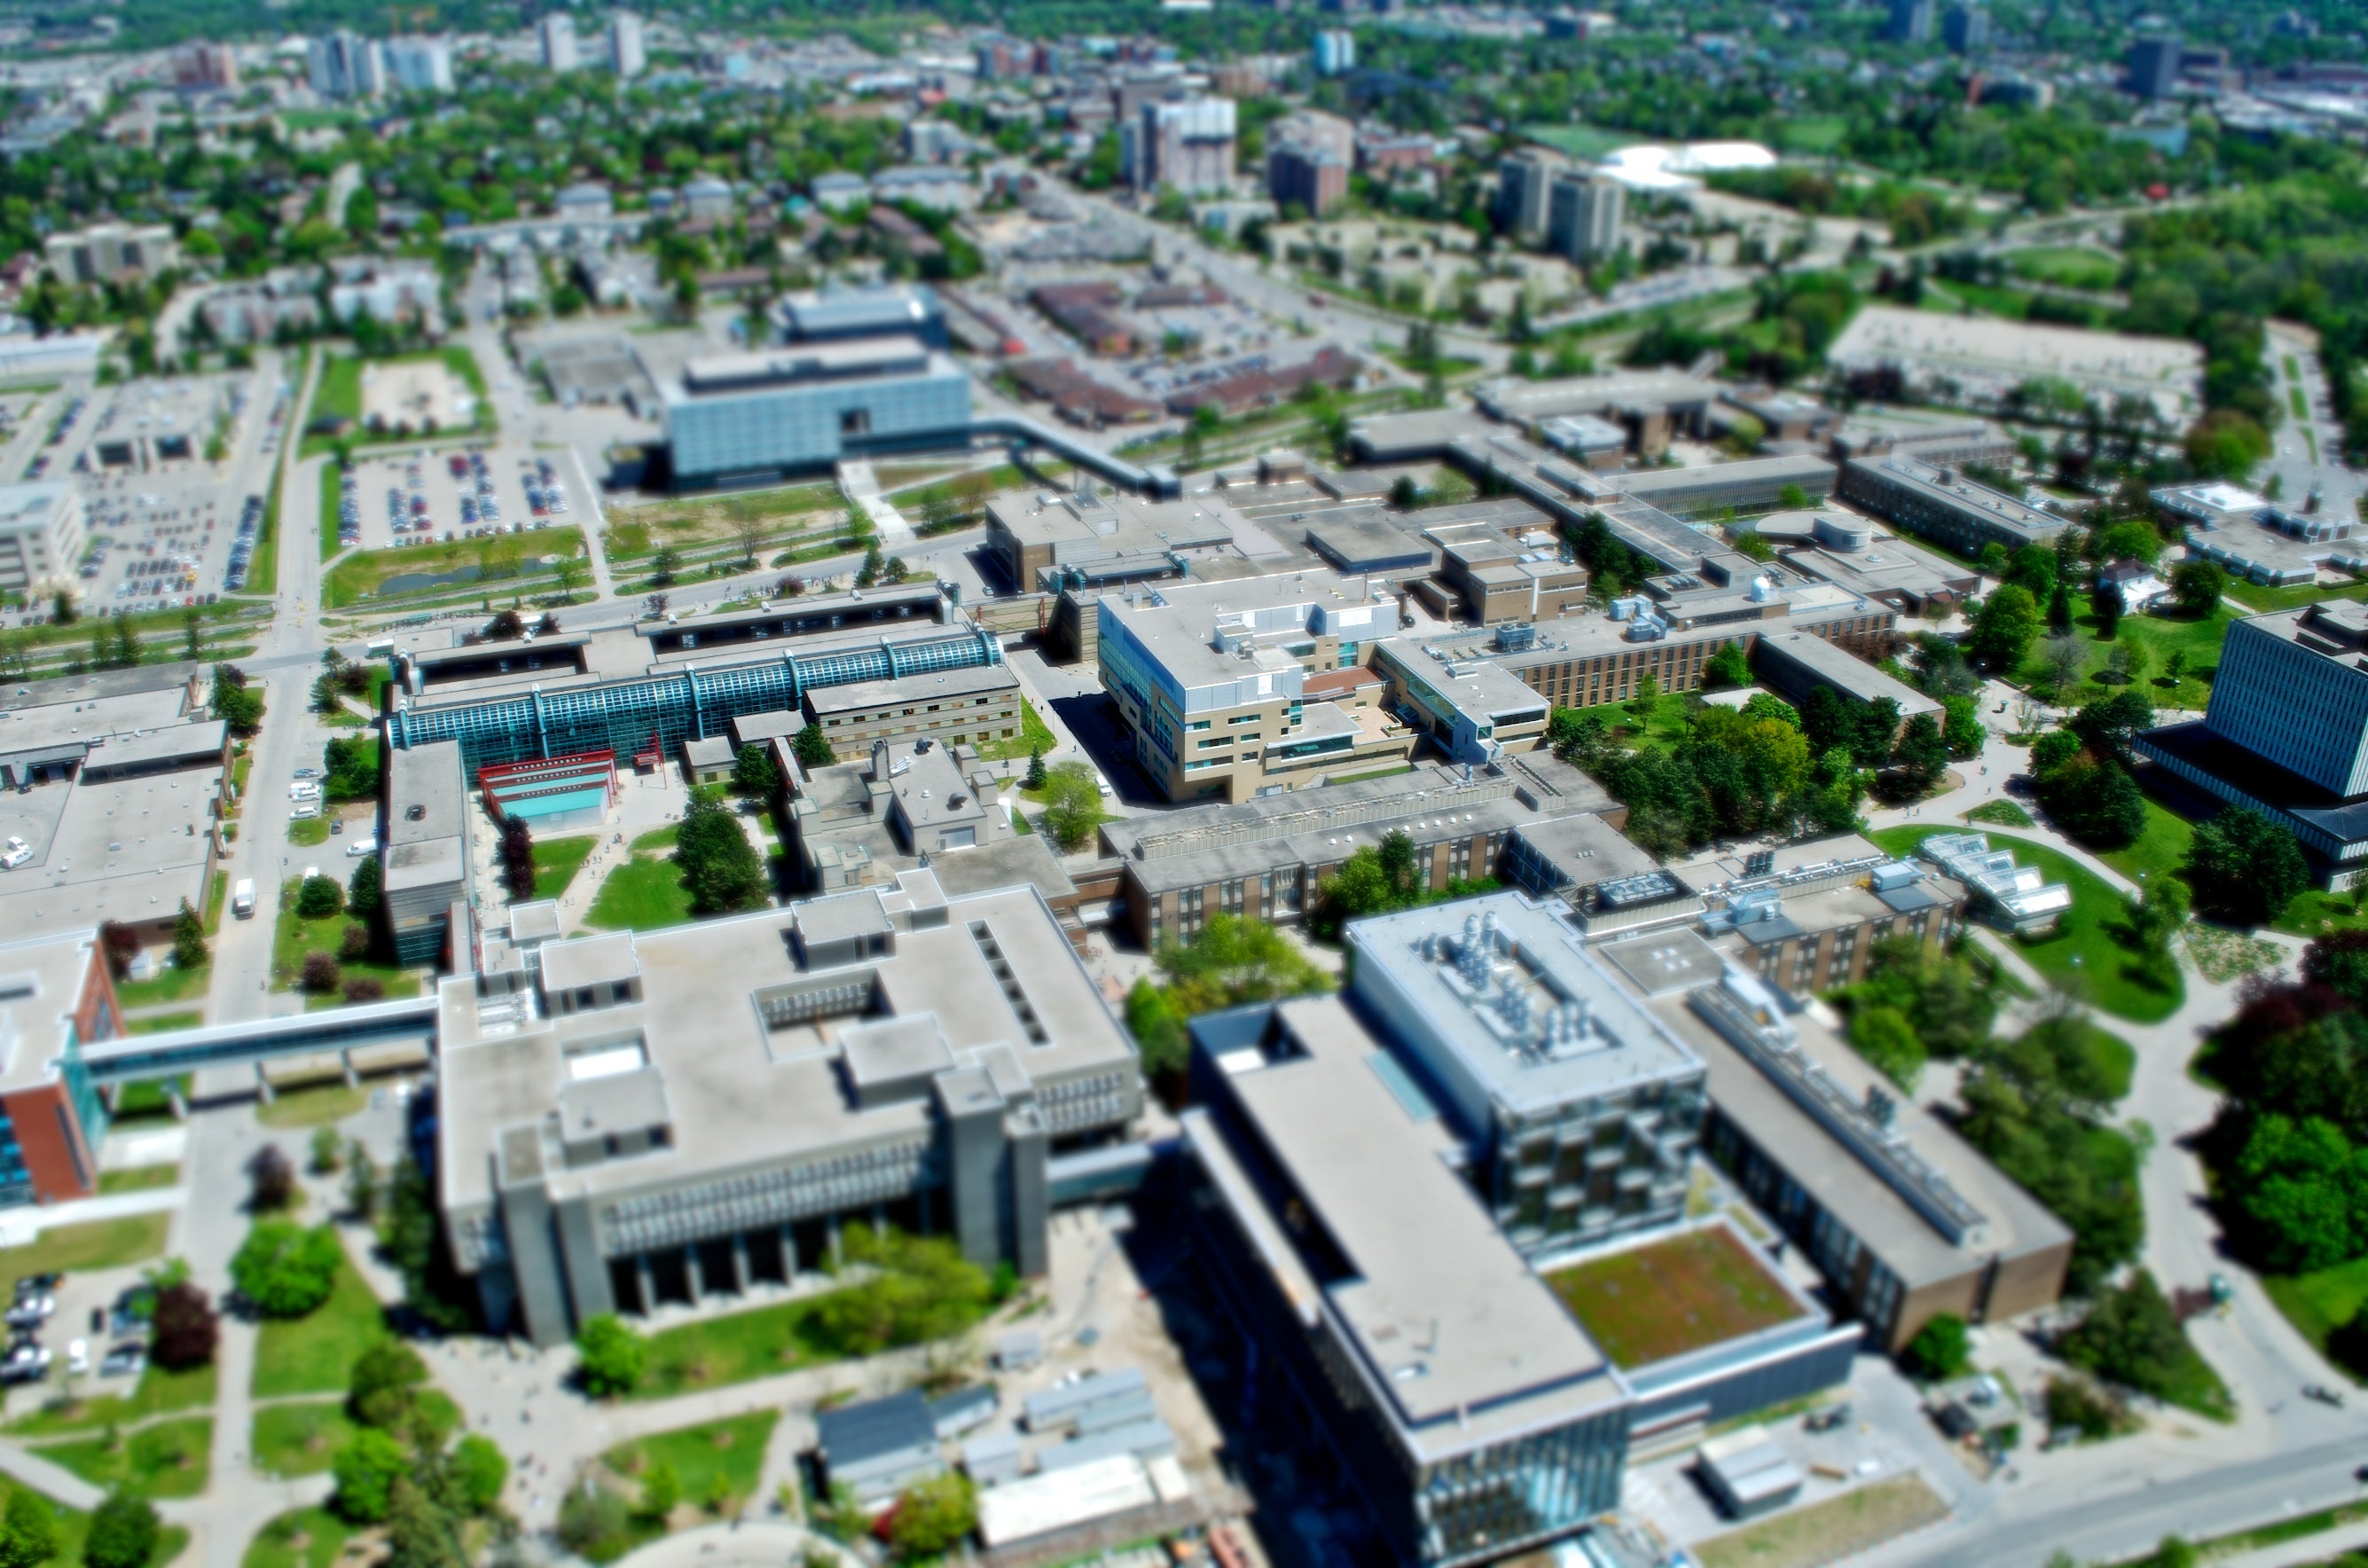 Waterloo campus from the air